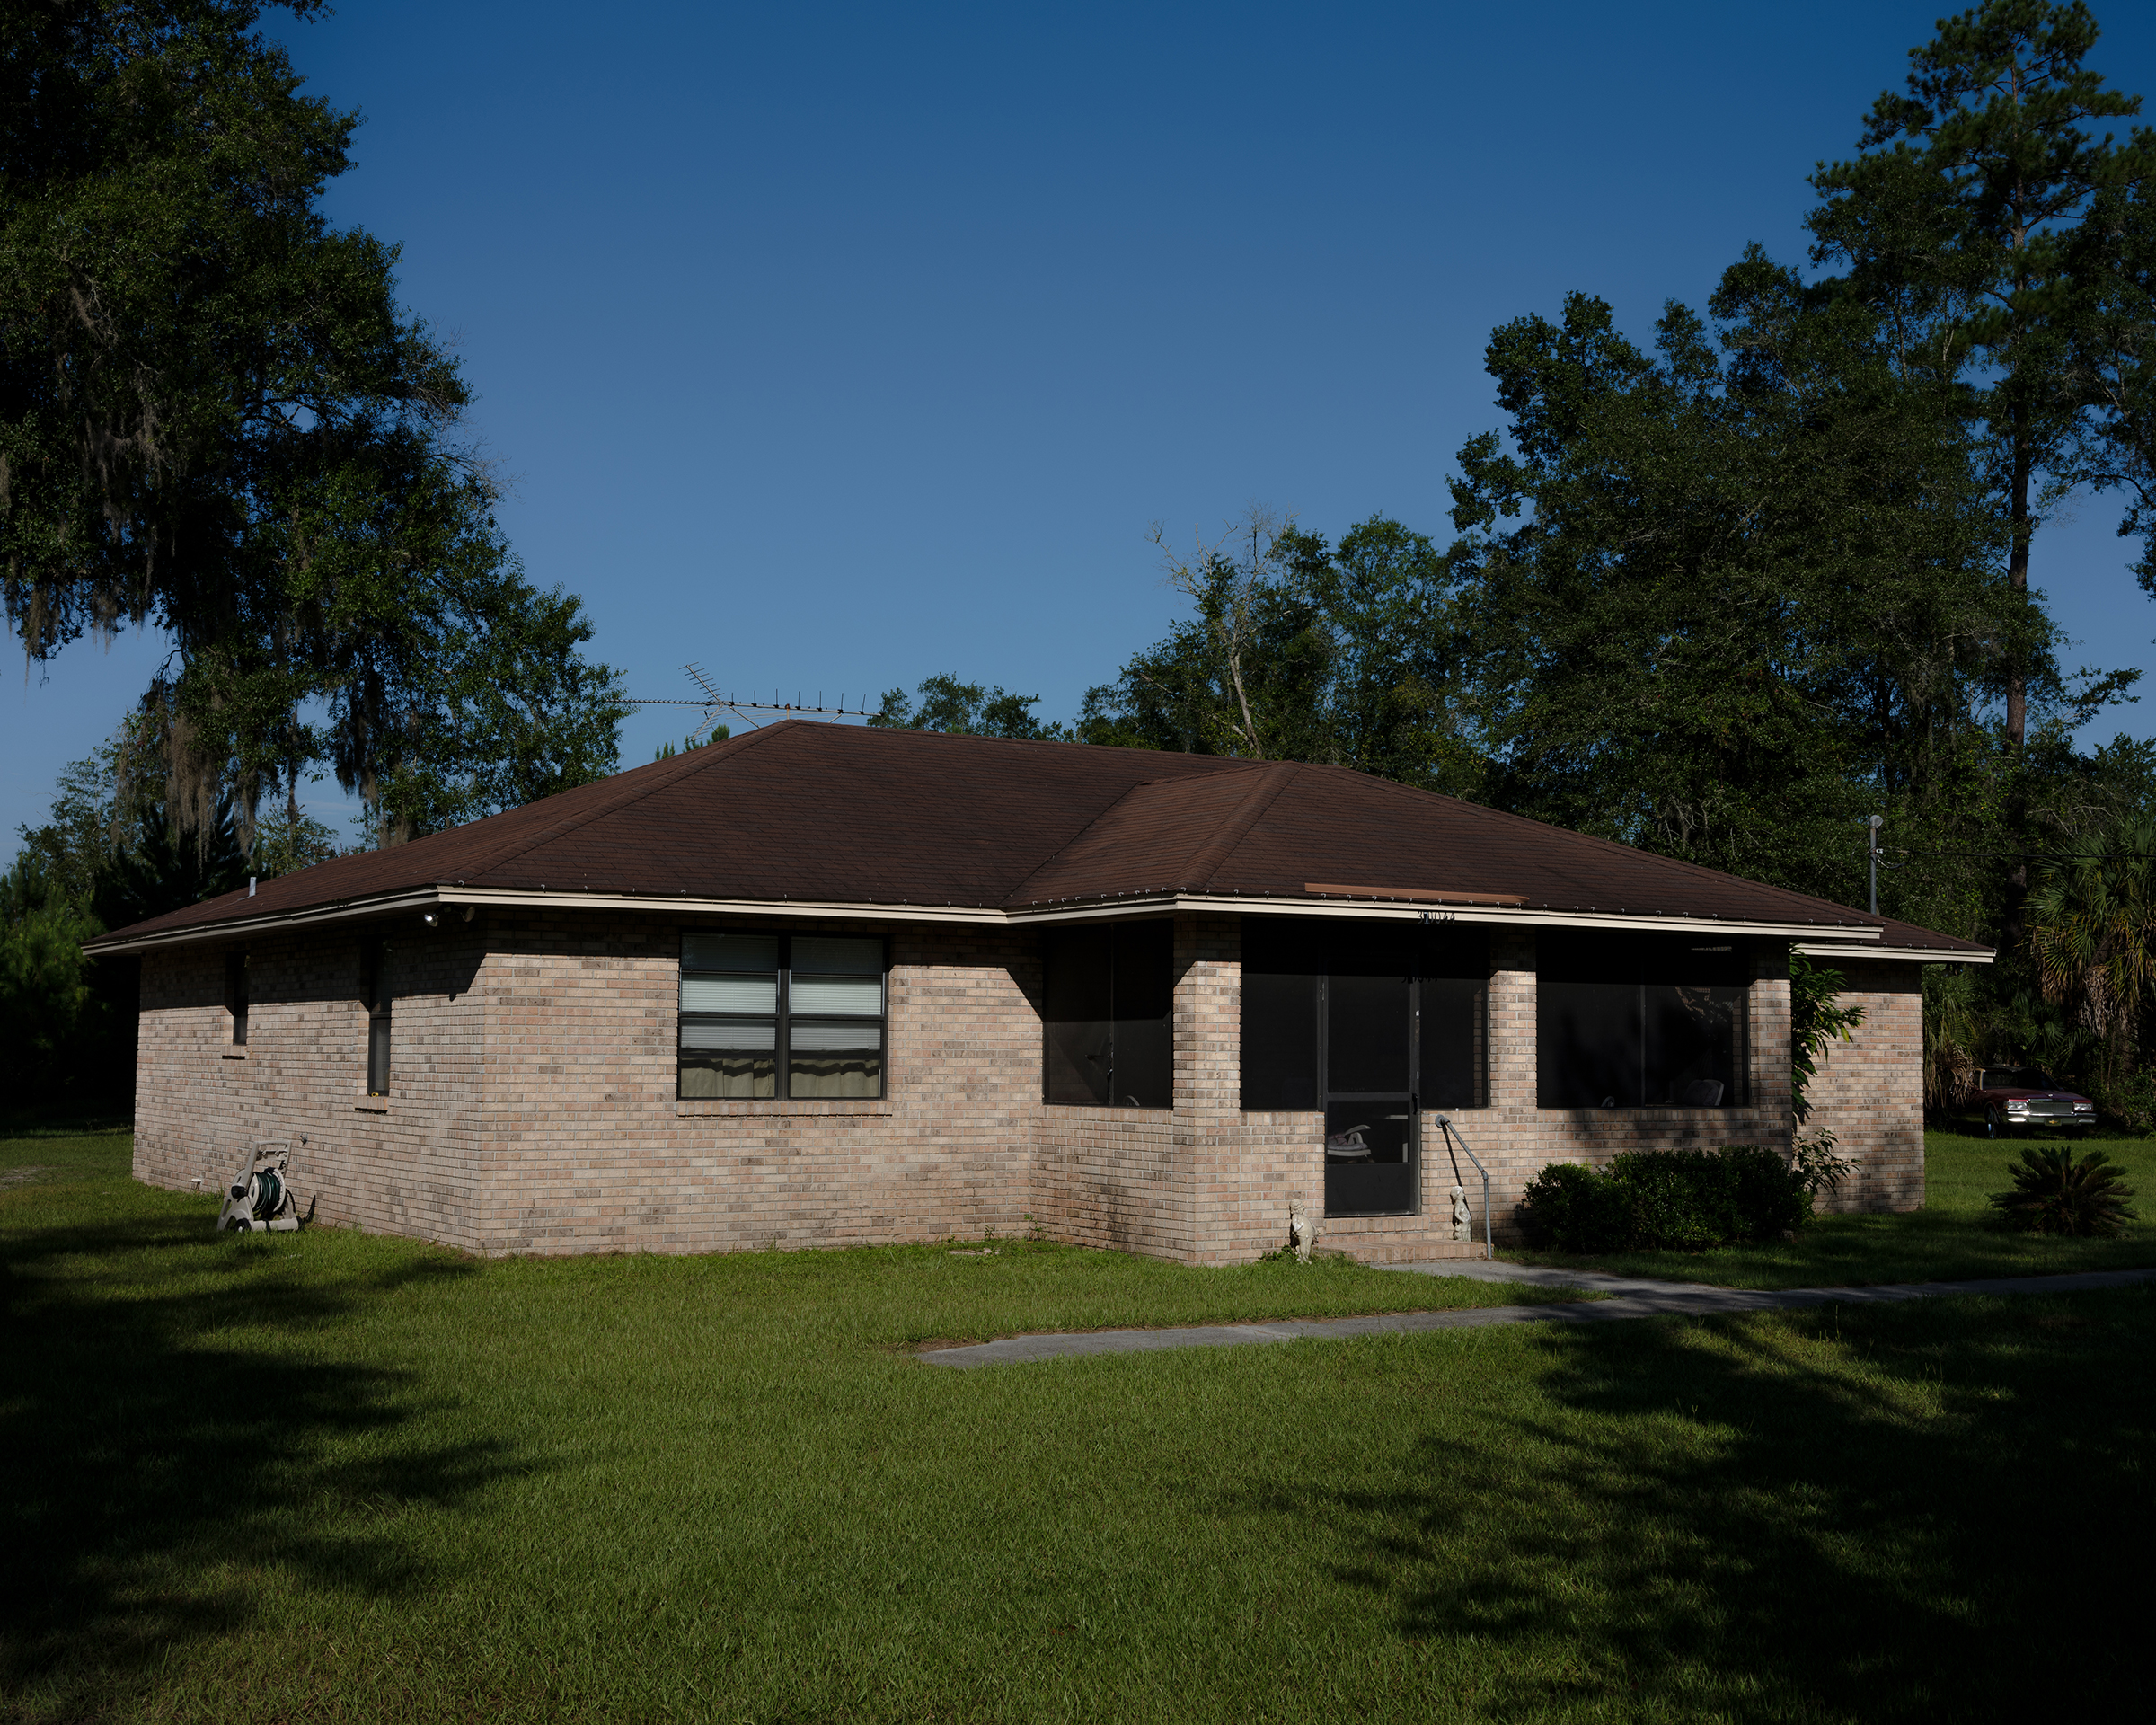 Mary Hall Daniels built a three-bedroom home in Hilliard, Fla., after receiving $150,000 from the state as a Rosewood survivor. (Rahim Fortune for TIME)